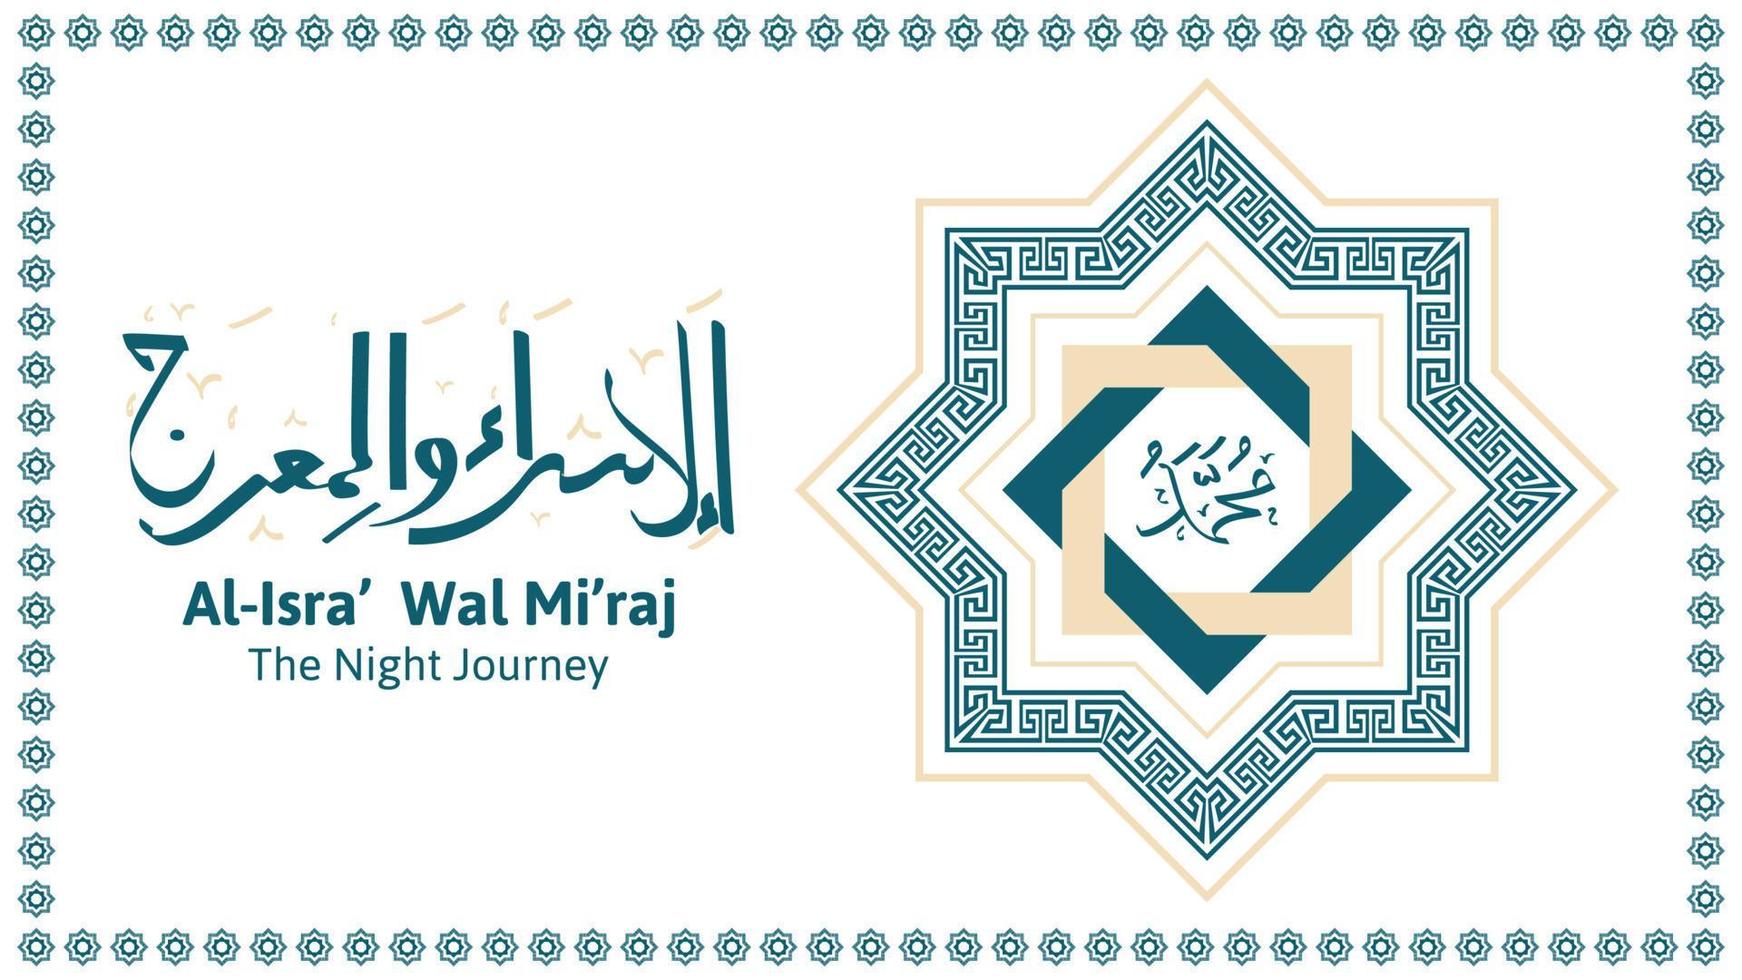 Isra Miraj background design with arabic calligraphy. suitable for social media post, greeting card, etc. vector